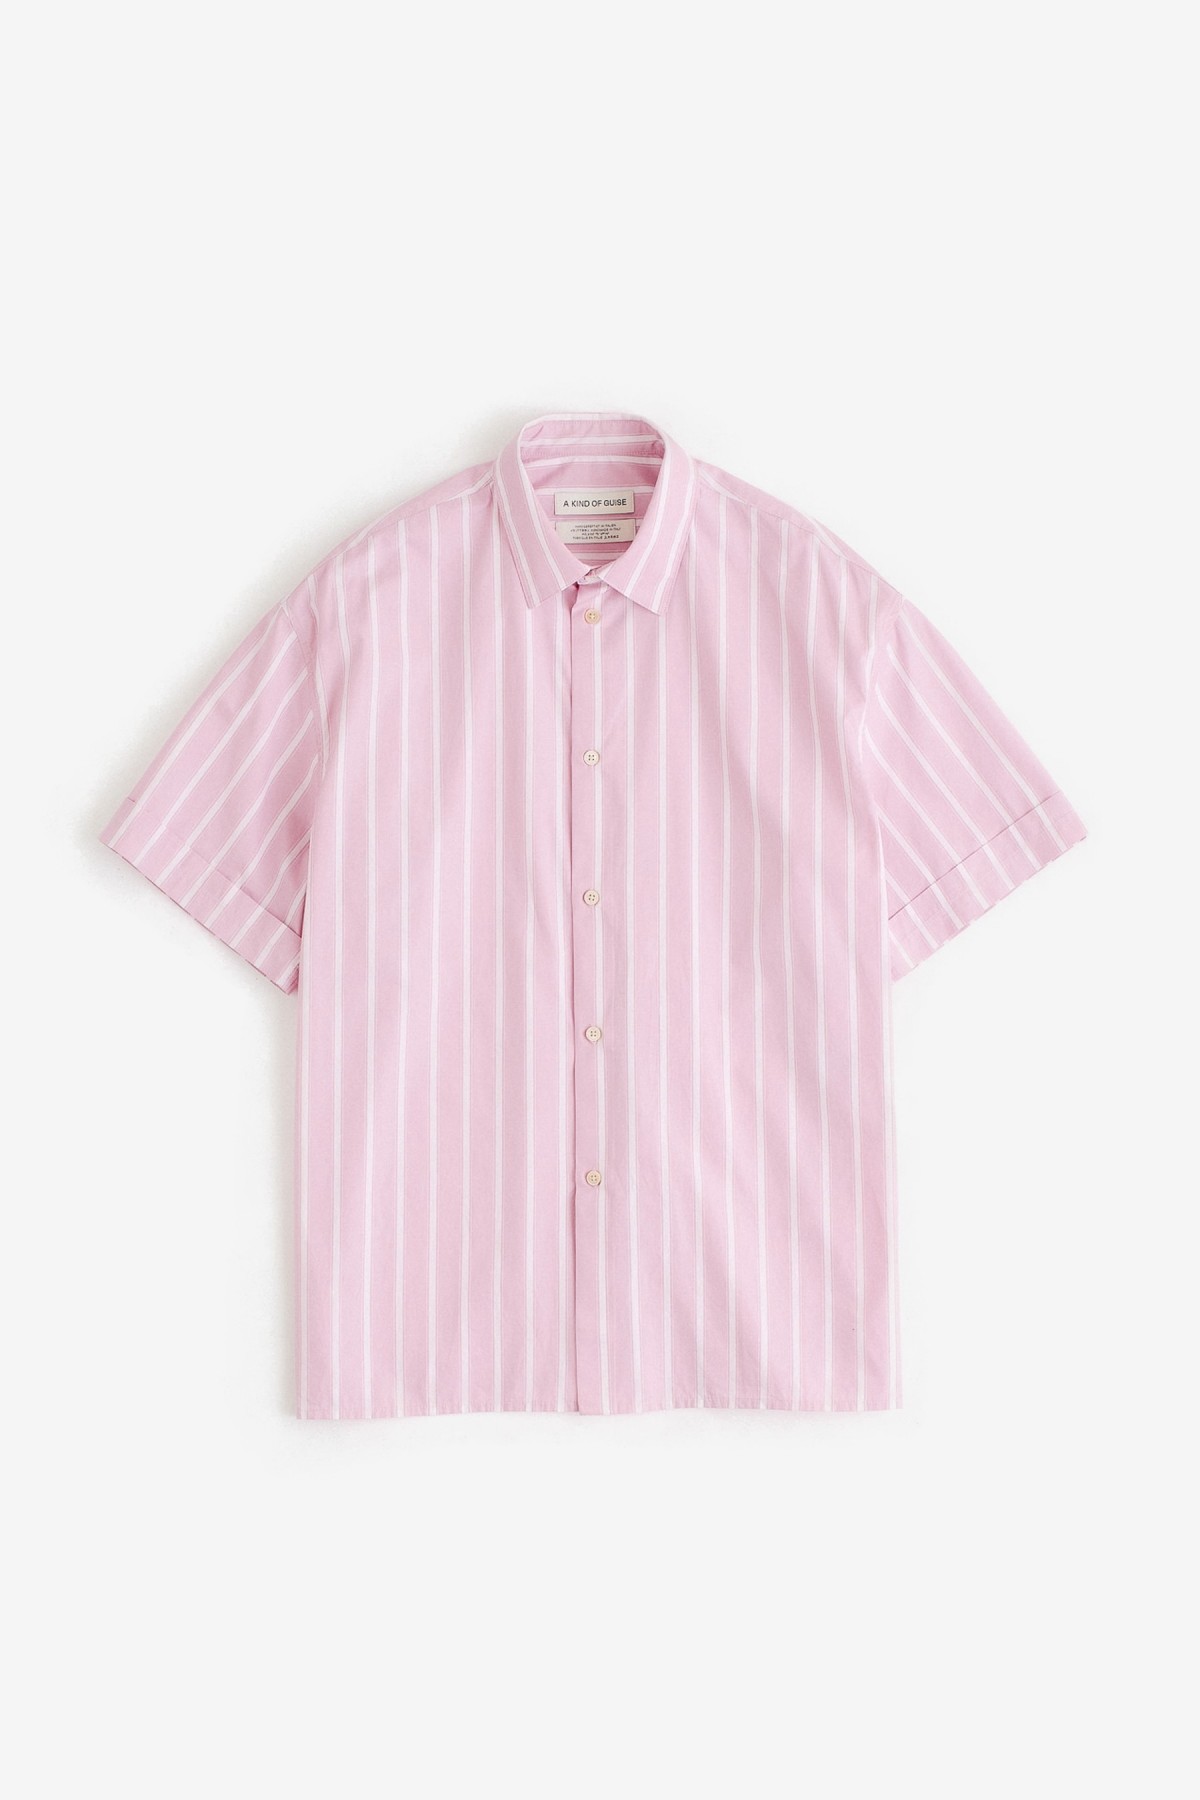 A Kind of Guise Elio Shirt in Cherryblossom Stripe